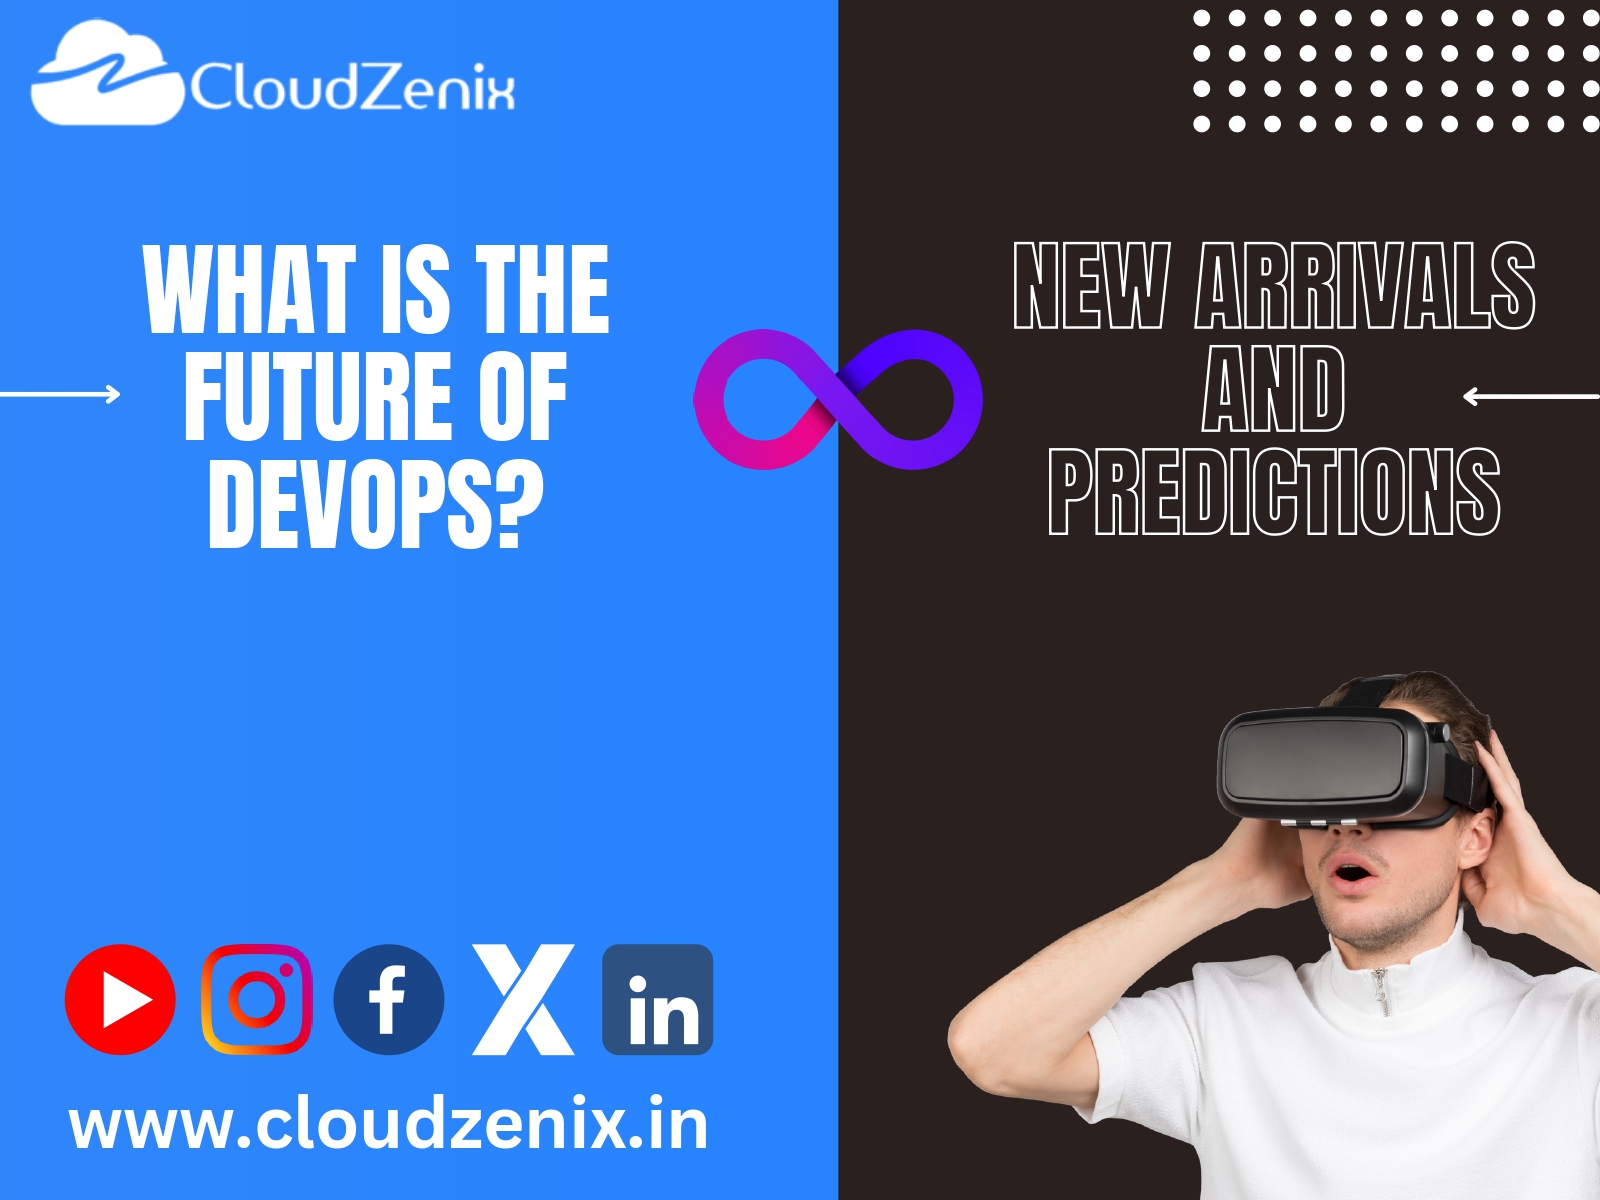 New arrivals and predictions in DevOps
